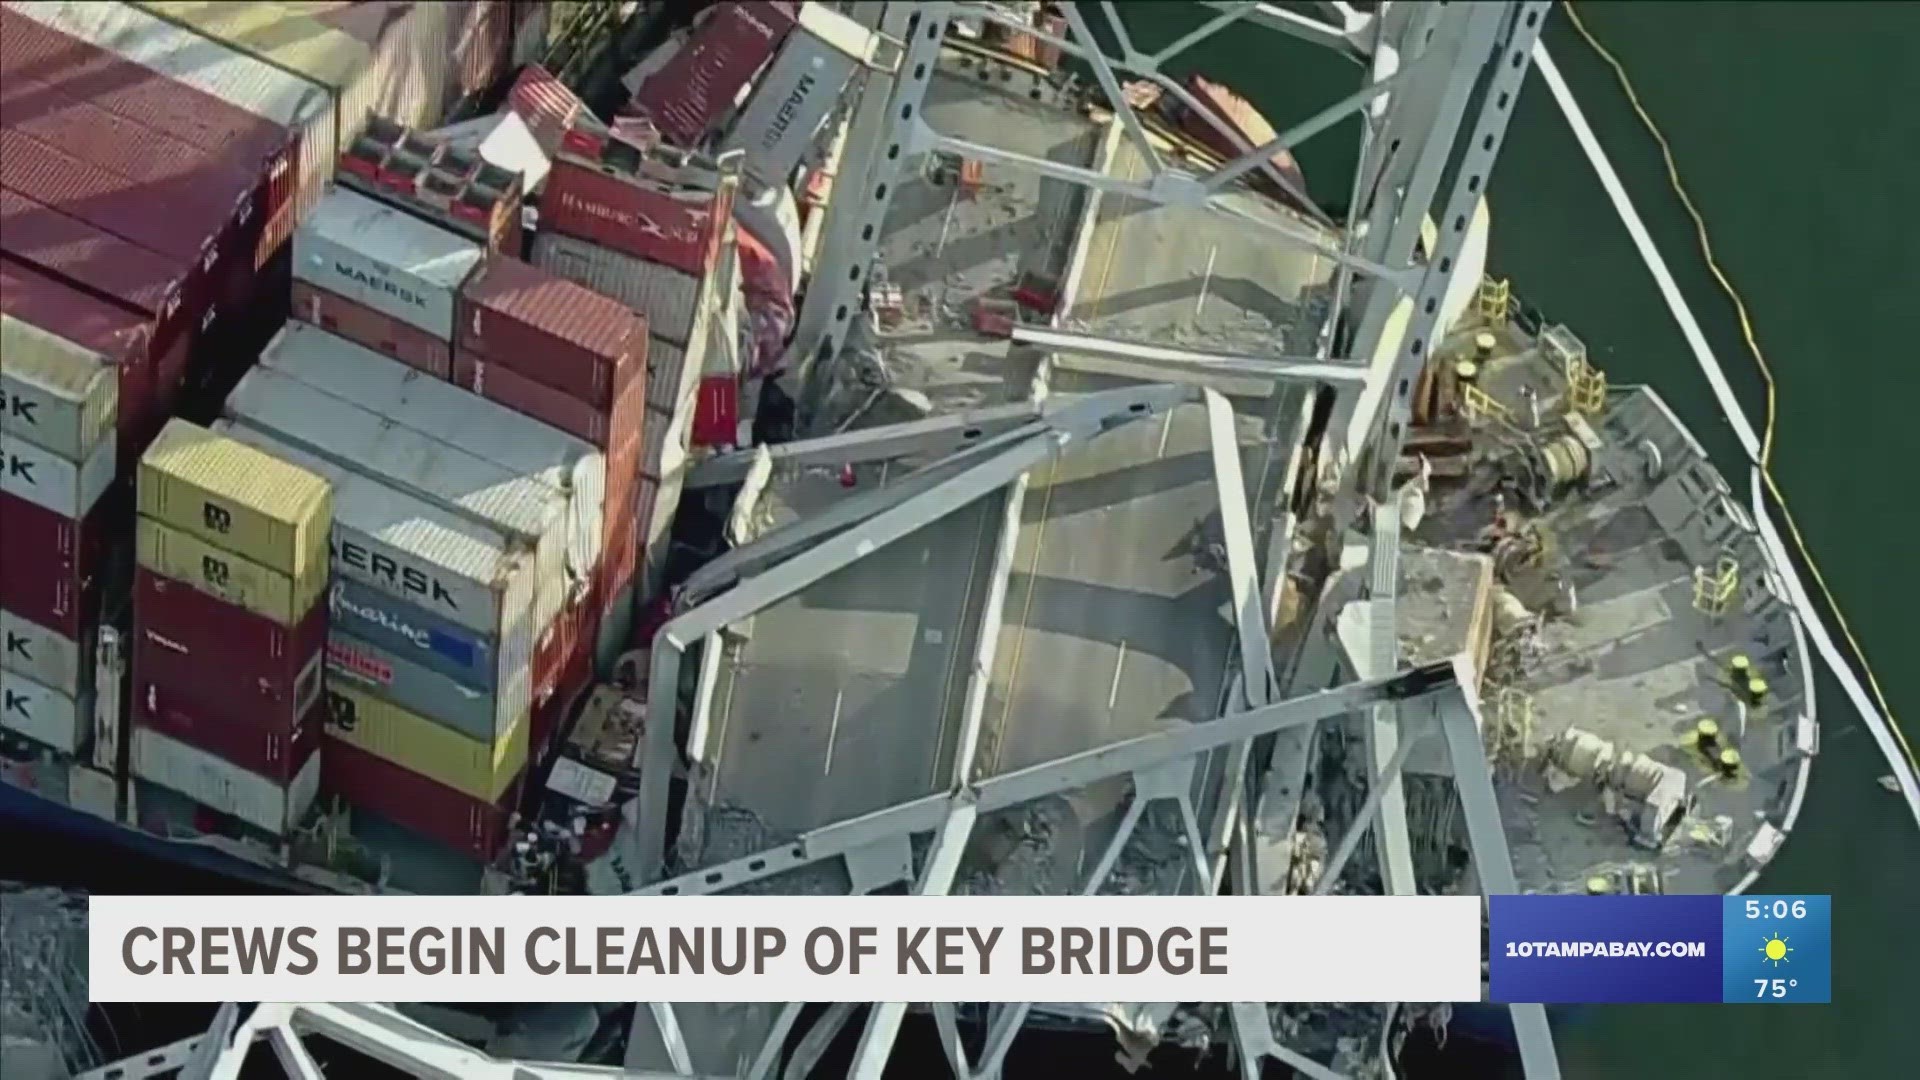 Two cranes will be used to clear the channel of the twisted metal and concrete remnants of the Francis Scott Key Bridge, as well as the cargo ship that hit it.